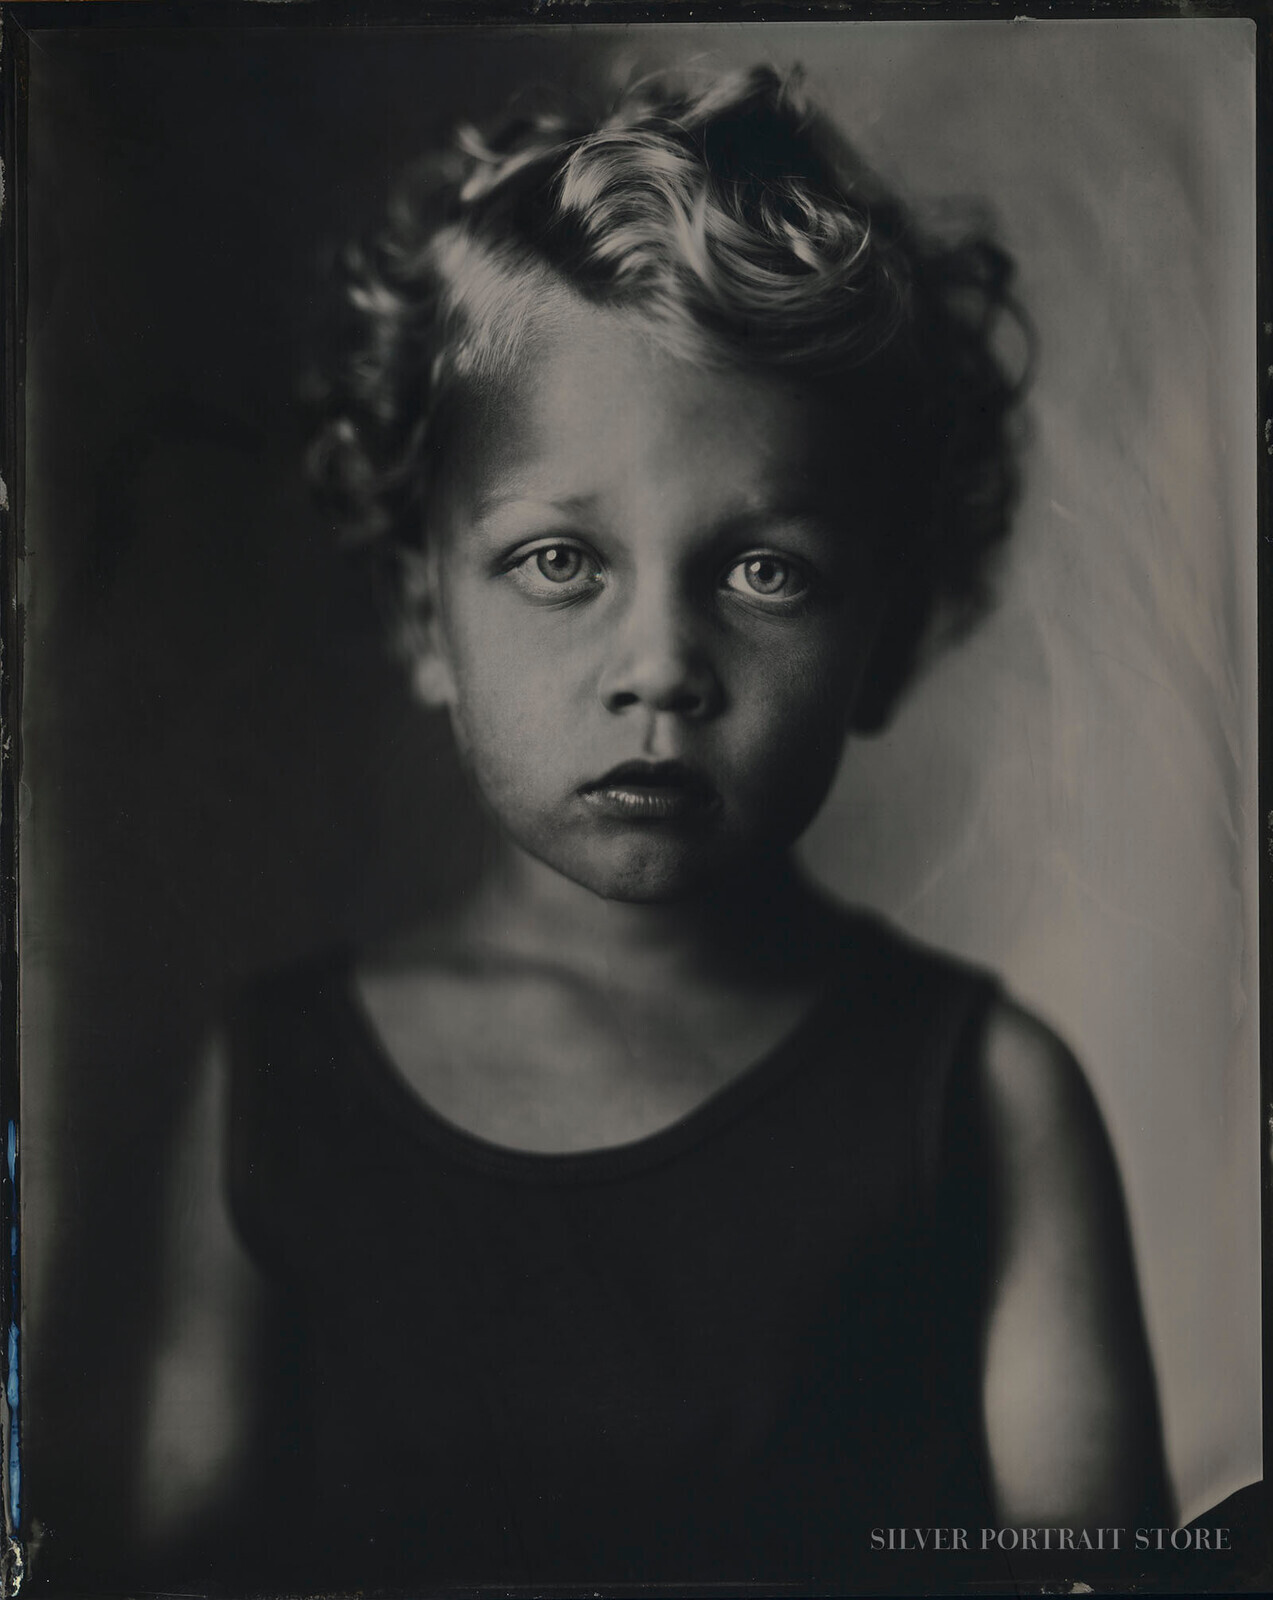 Vic-Silver Portrait Store-Wet plate collodion-Tintype 20 x 25 cm.